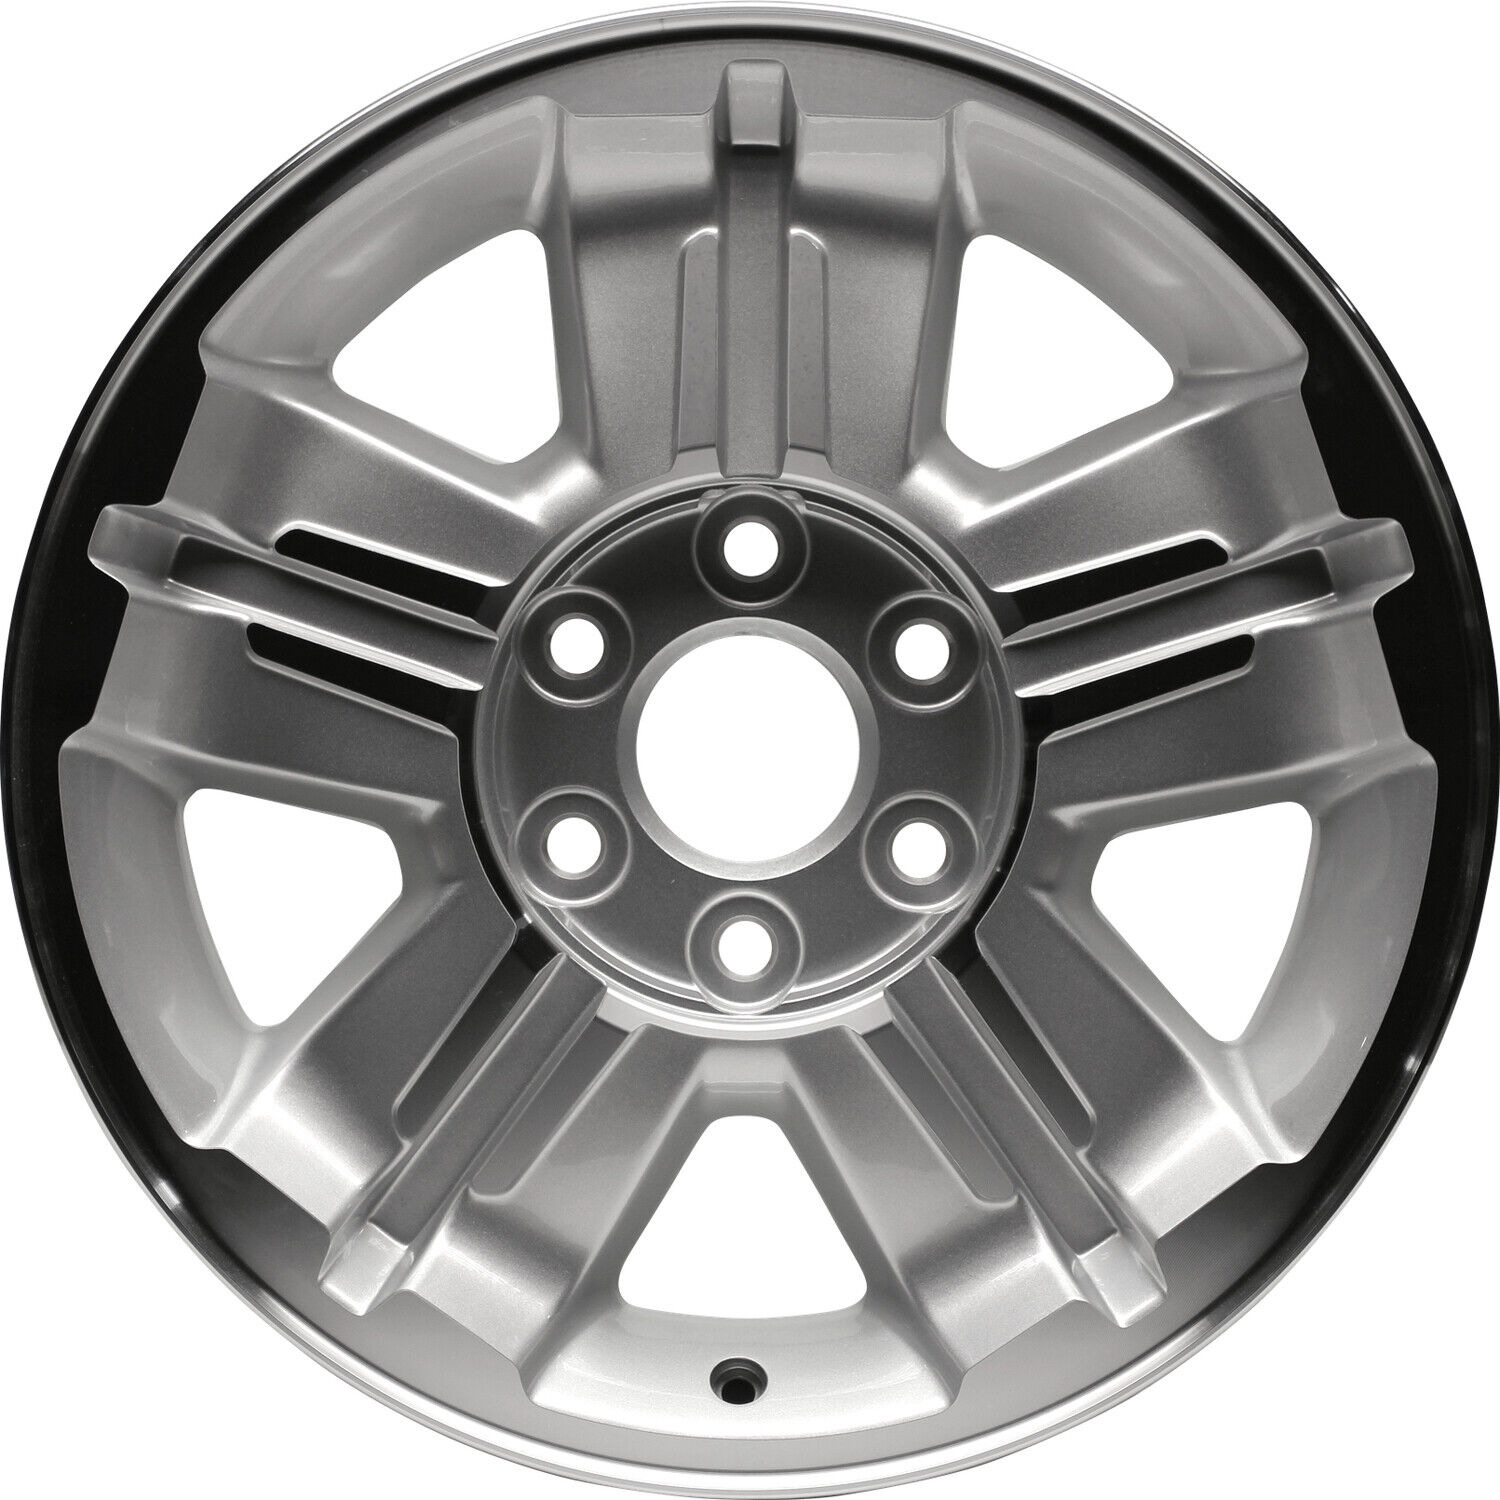 05300 Reconditioned OEM Aluminum Wheel 18x8 fits 2007-2013 Chevrolet Avalanche